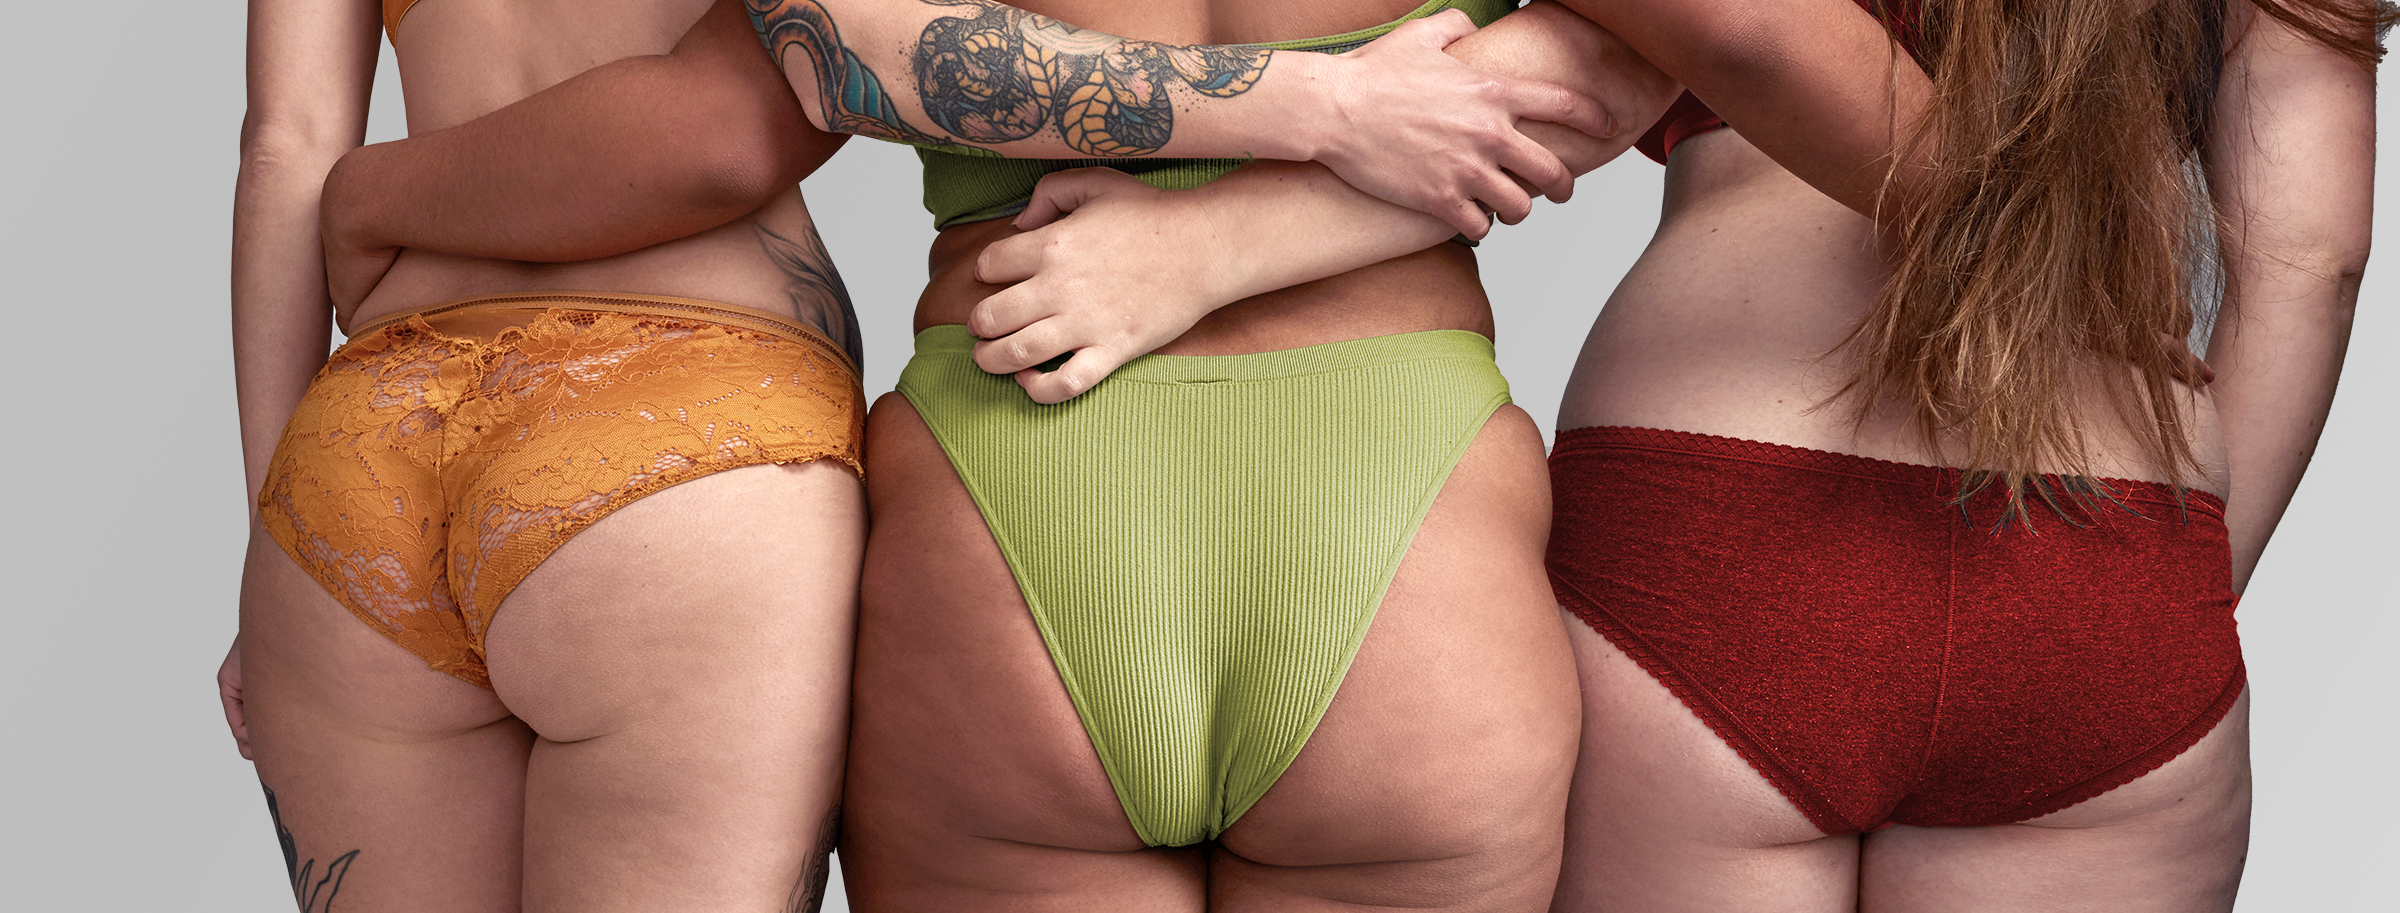 Three perfectly average women in underwear, seen from behind